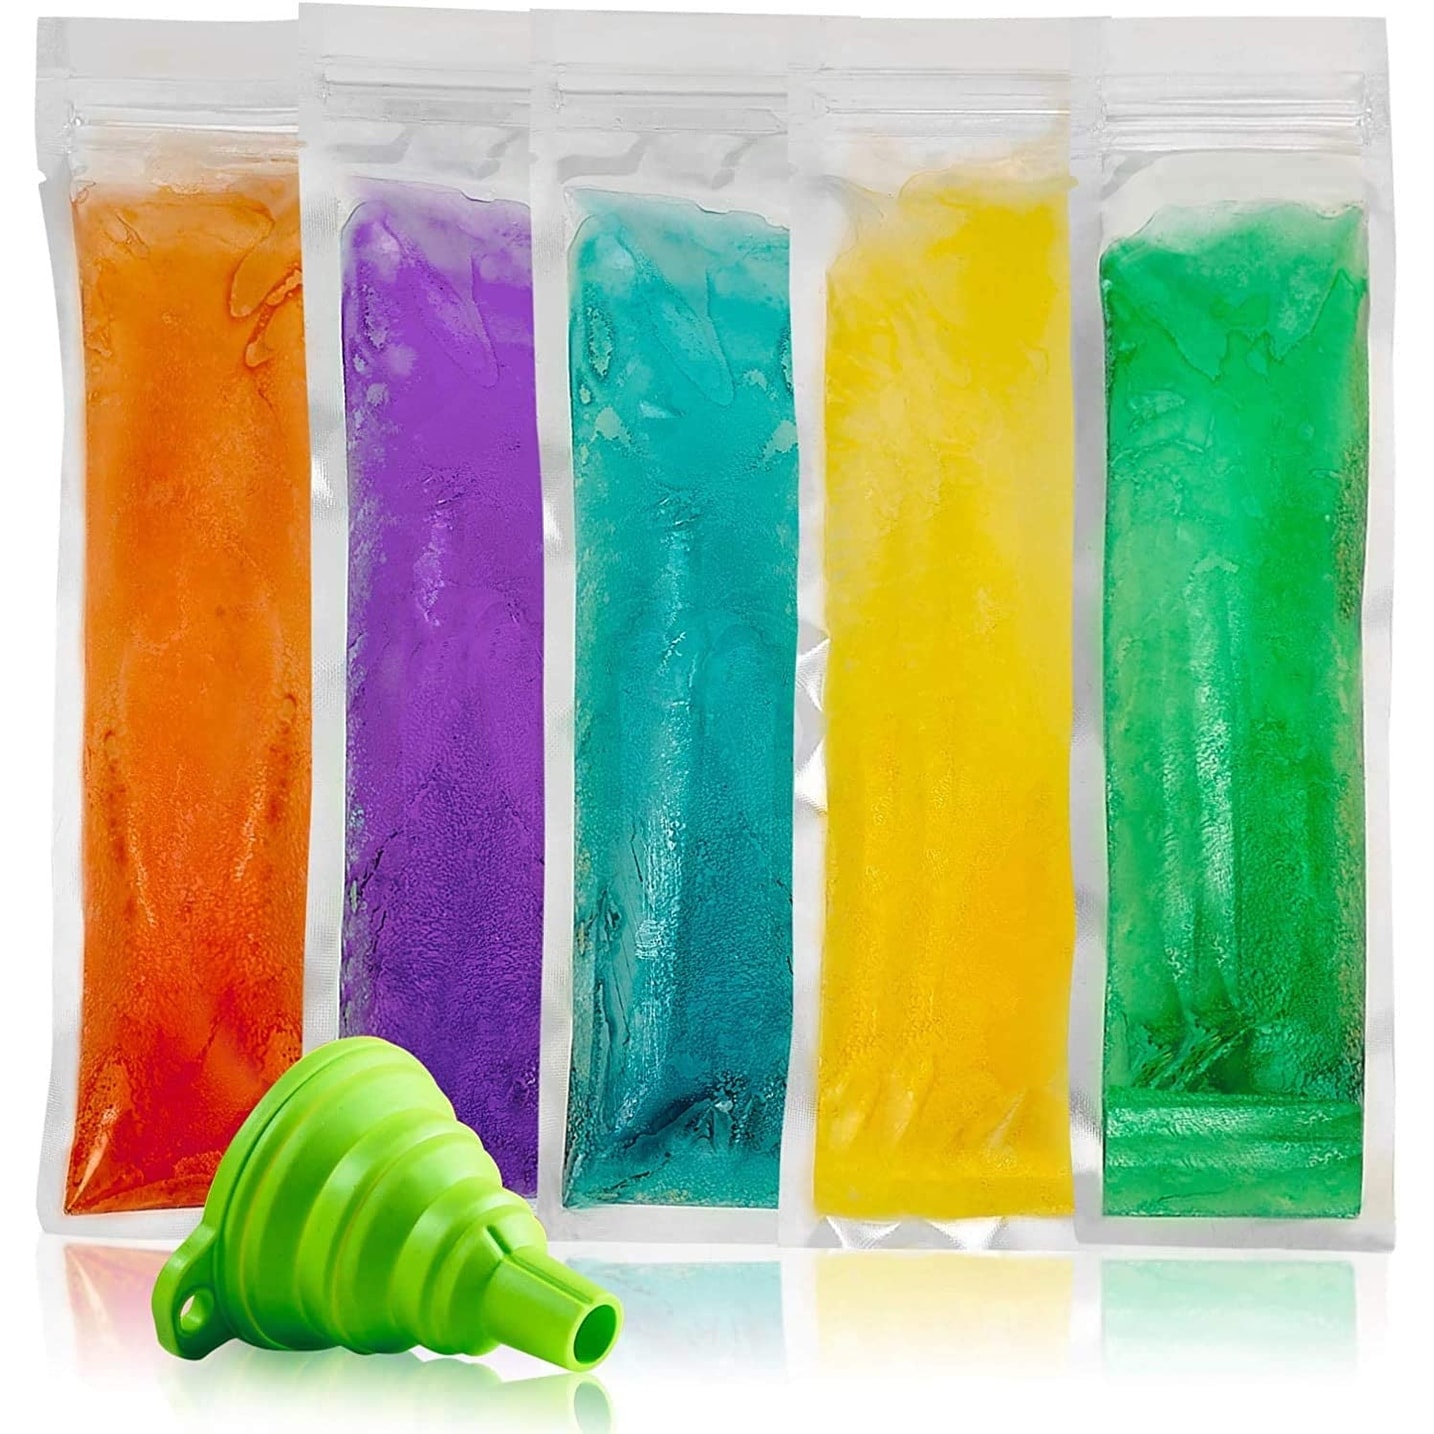 https://ak1.ostkcdn.com/images/products/is/images/direct/c03789ceaface1a6d4b030405e53e5a57ddeff09/Popsicle-Zip-Sealed-Bags%2C-Funnel-5-Pcs-Disposable-Otter-Freeze-Pop-Molds.jpg